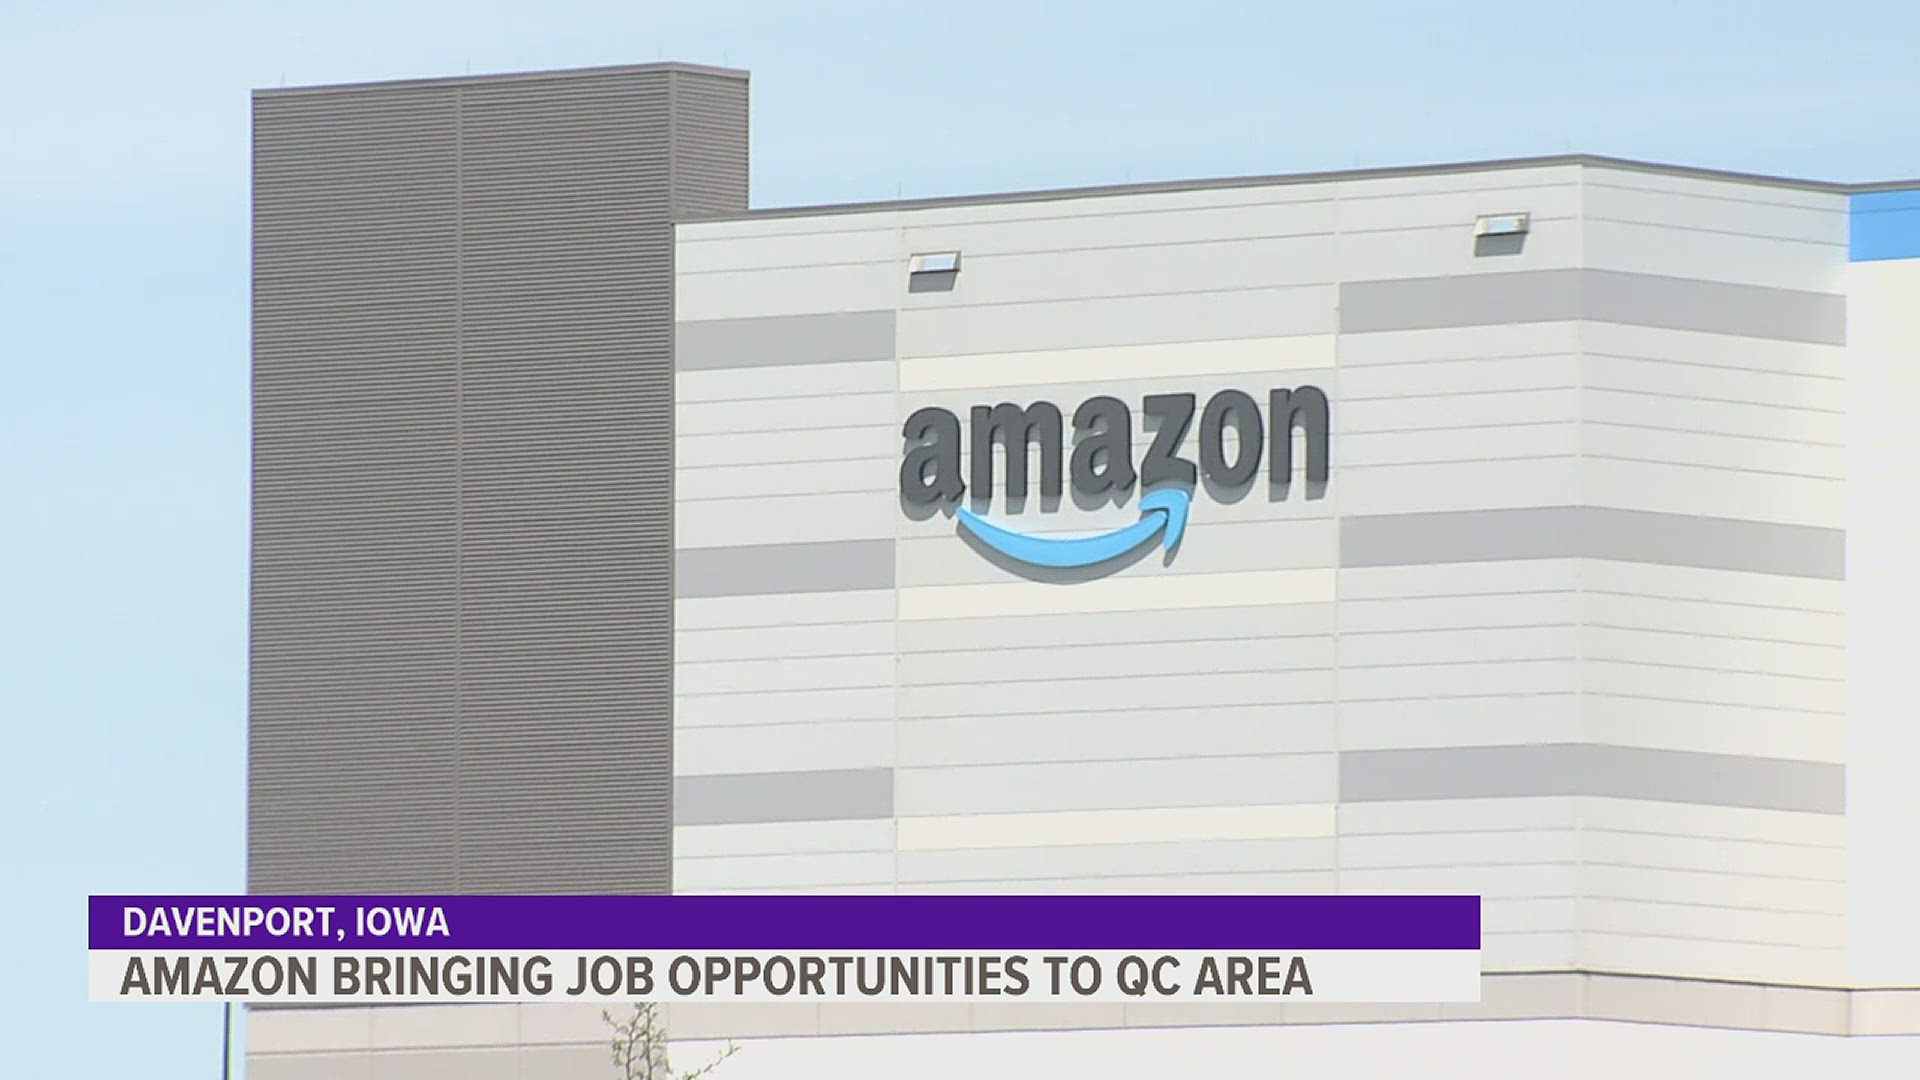 The company plans on opening its Davenport fulfillment center in August.